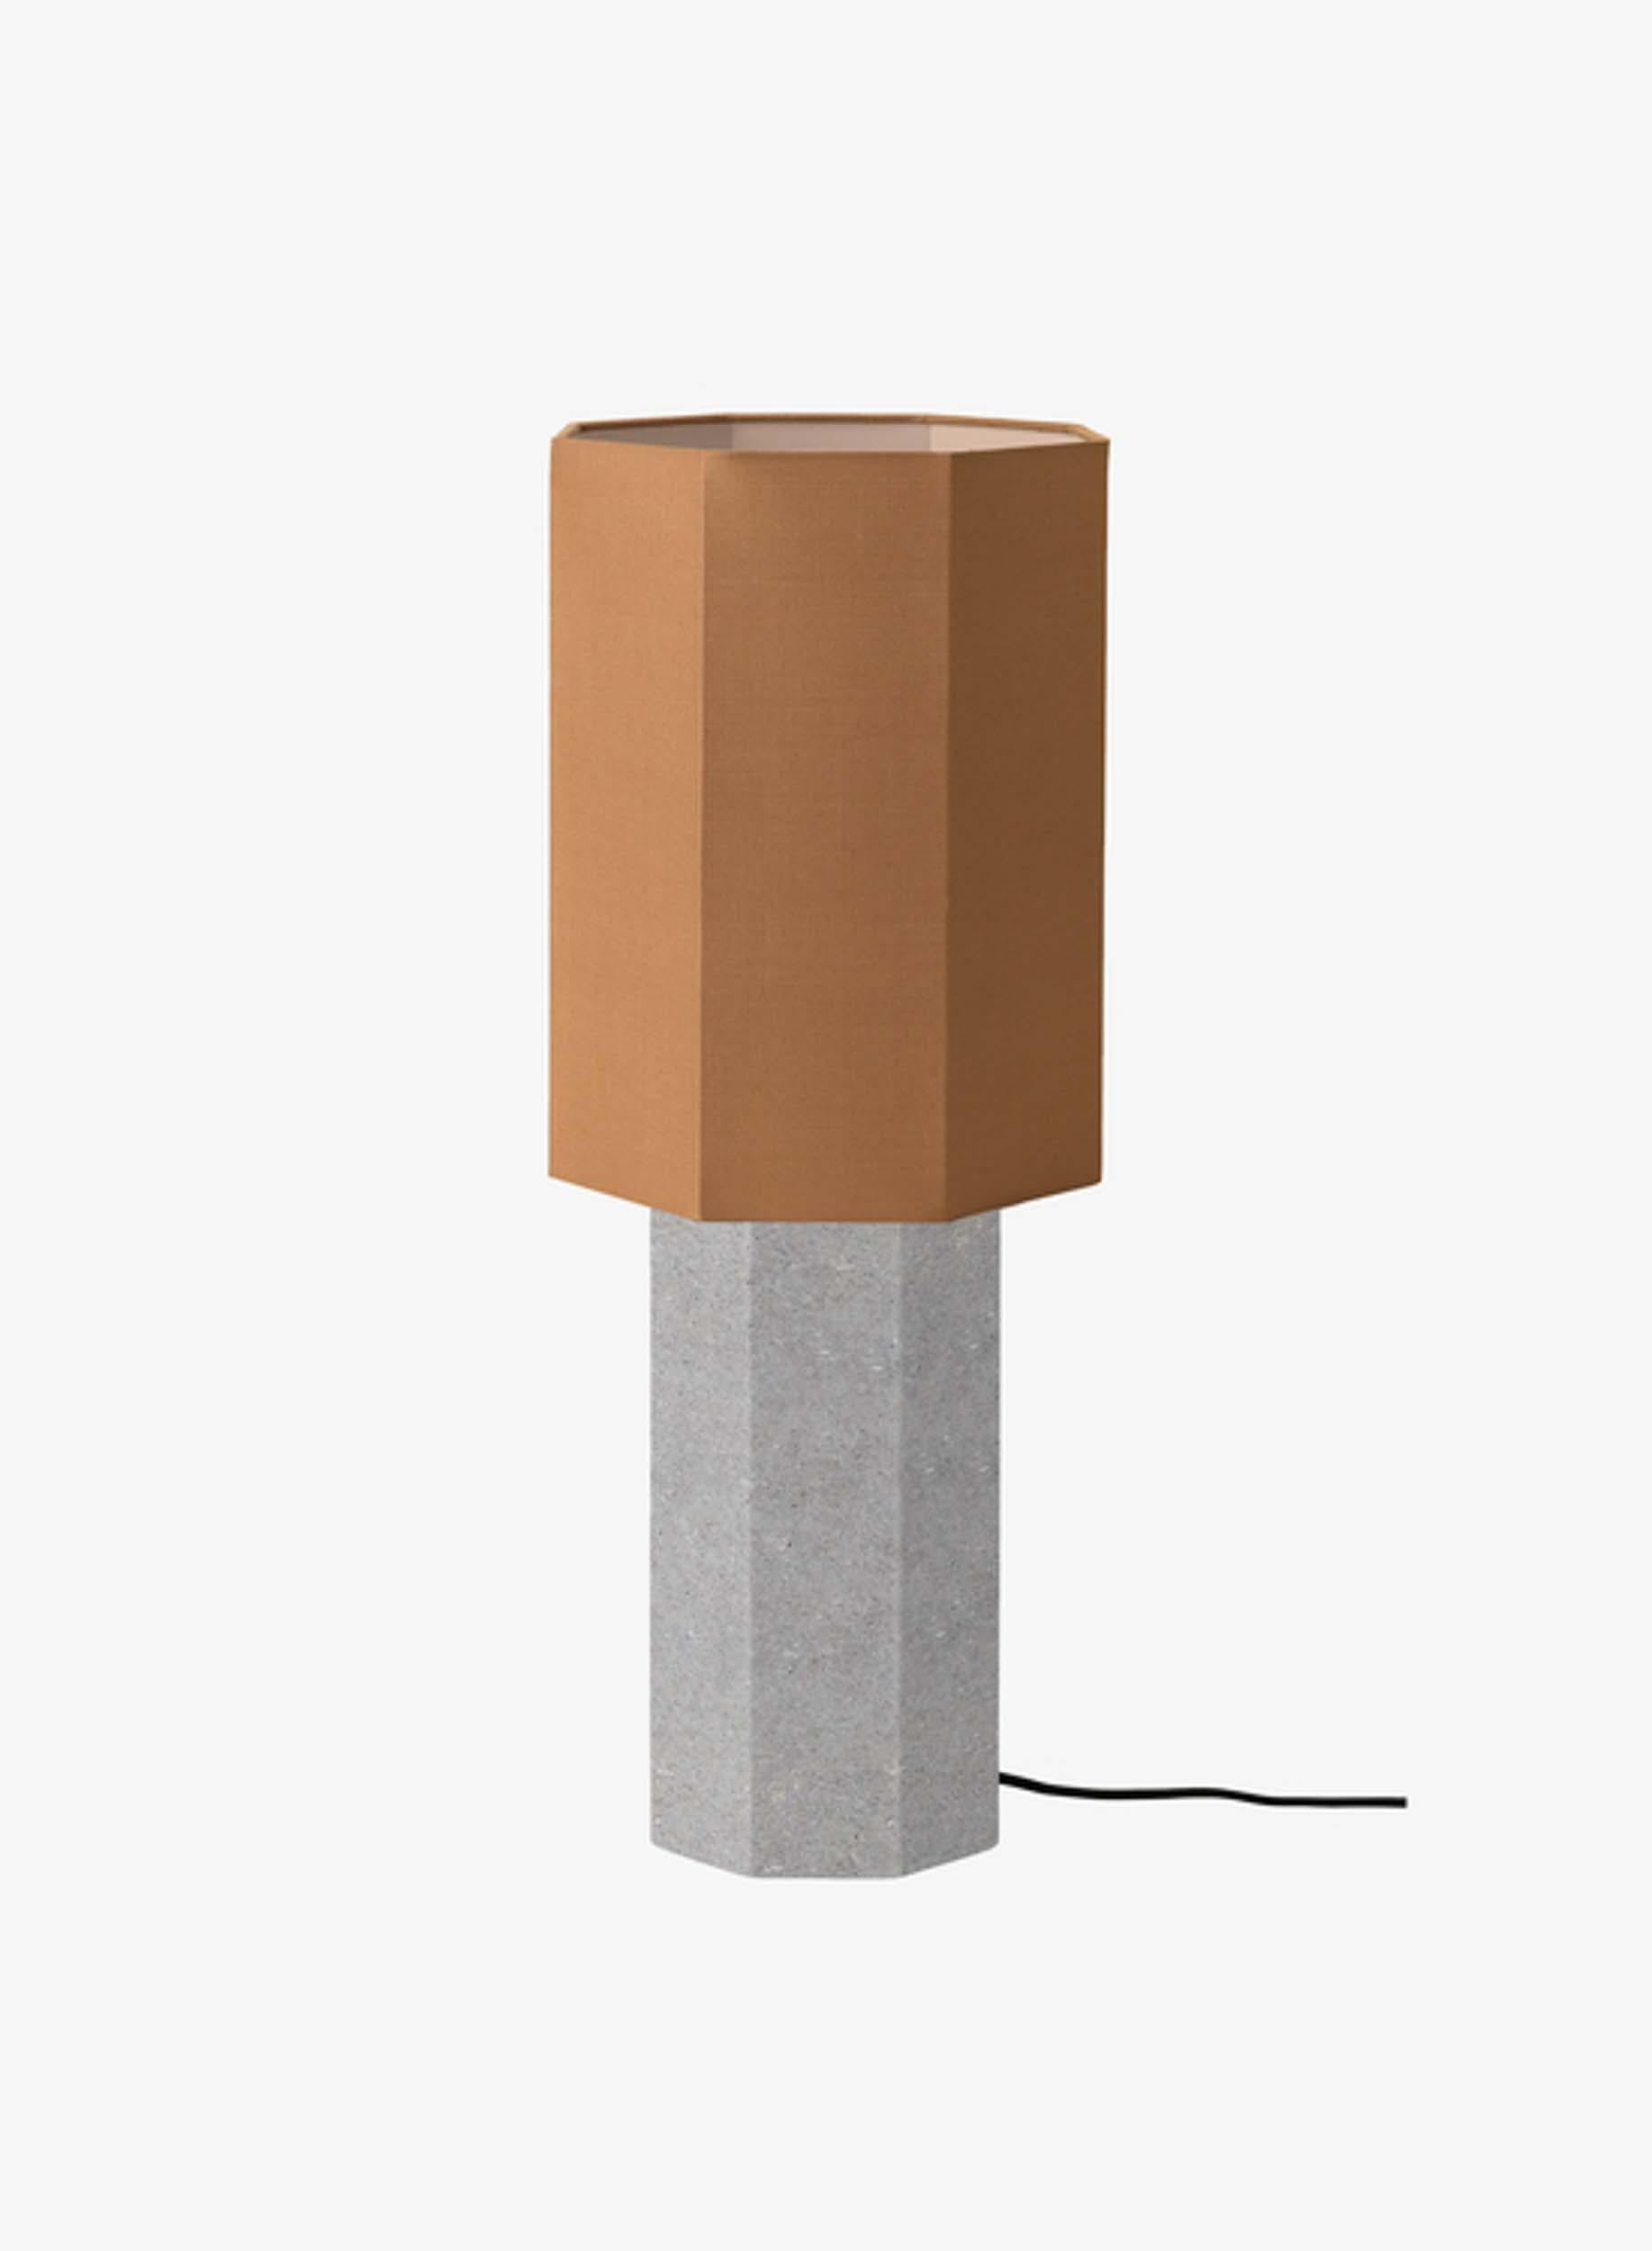 Table Lamp 'The Eight over Eight' by Louise Roe 

Designed in Denmark and manufactured in Italy.

Model shown in the picture: 
Base: Grey marble
Lampshade: ocher 

Dimensions : 
Height: 60 cm
Diameter: 21.5 cm

Louise Roe is a Copenhagen based